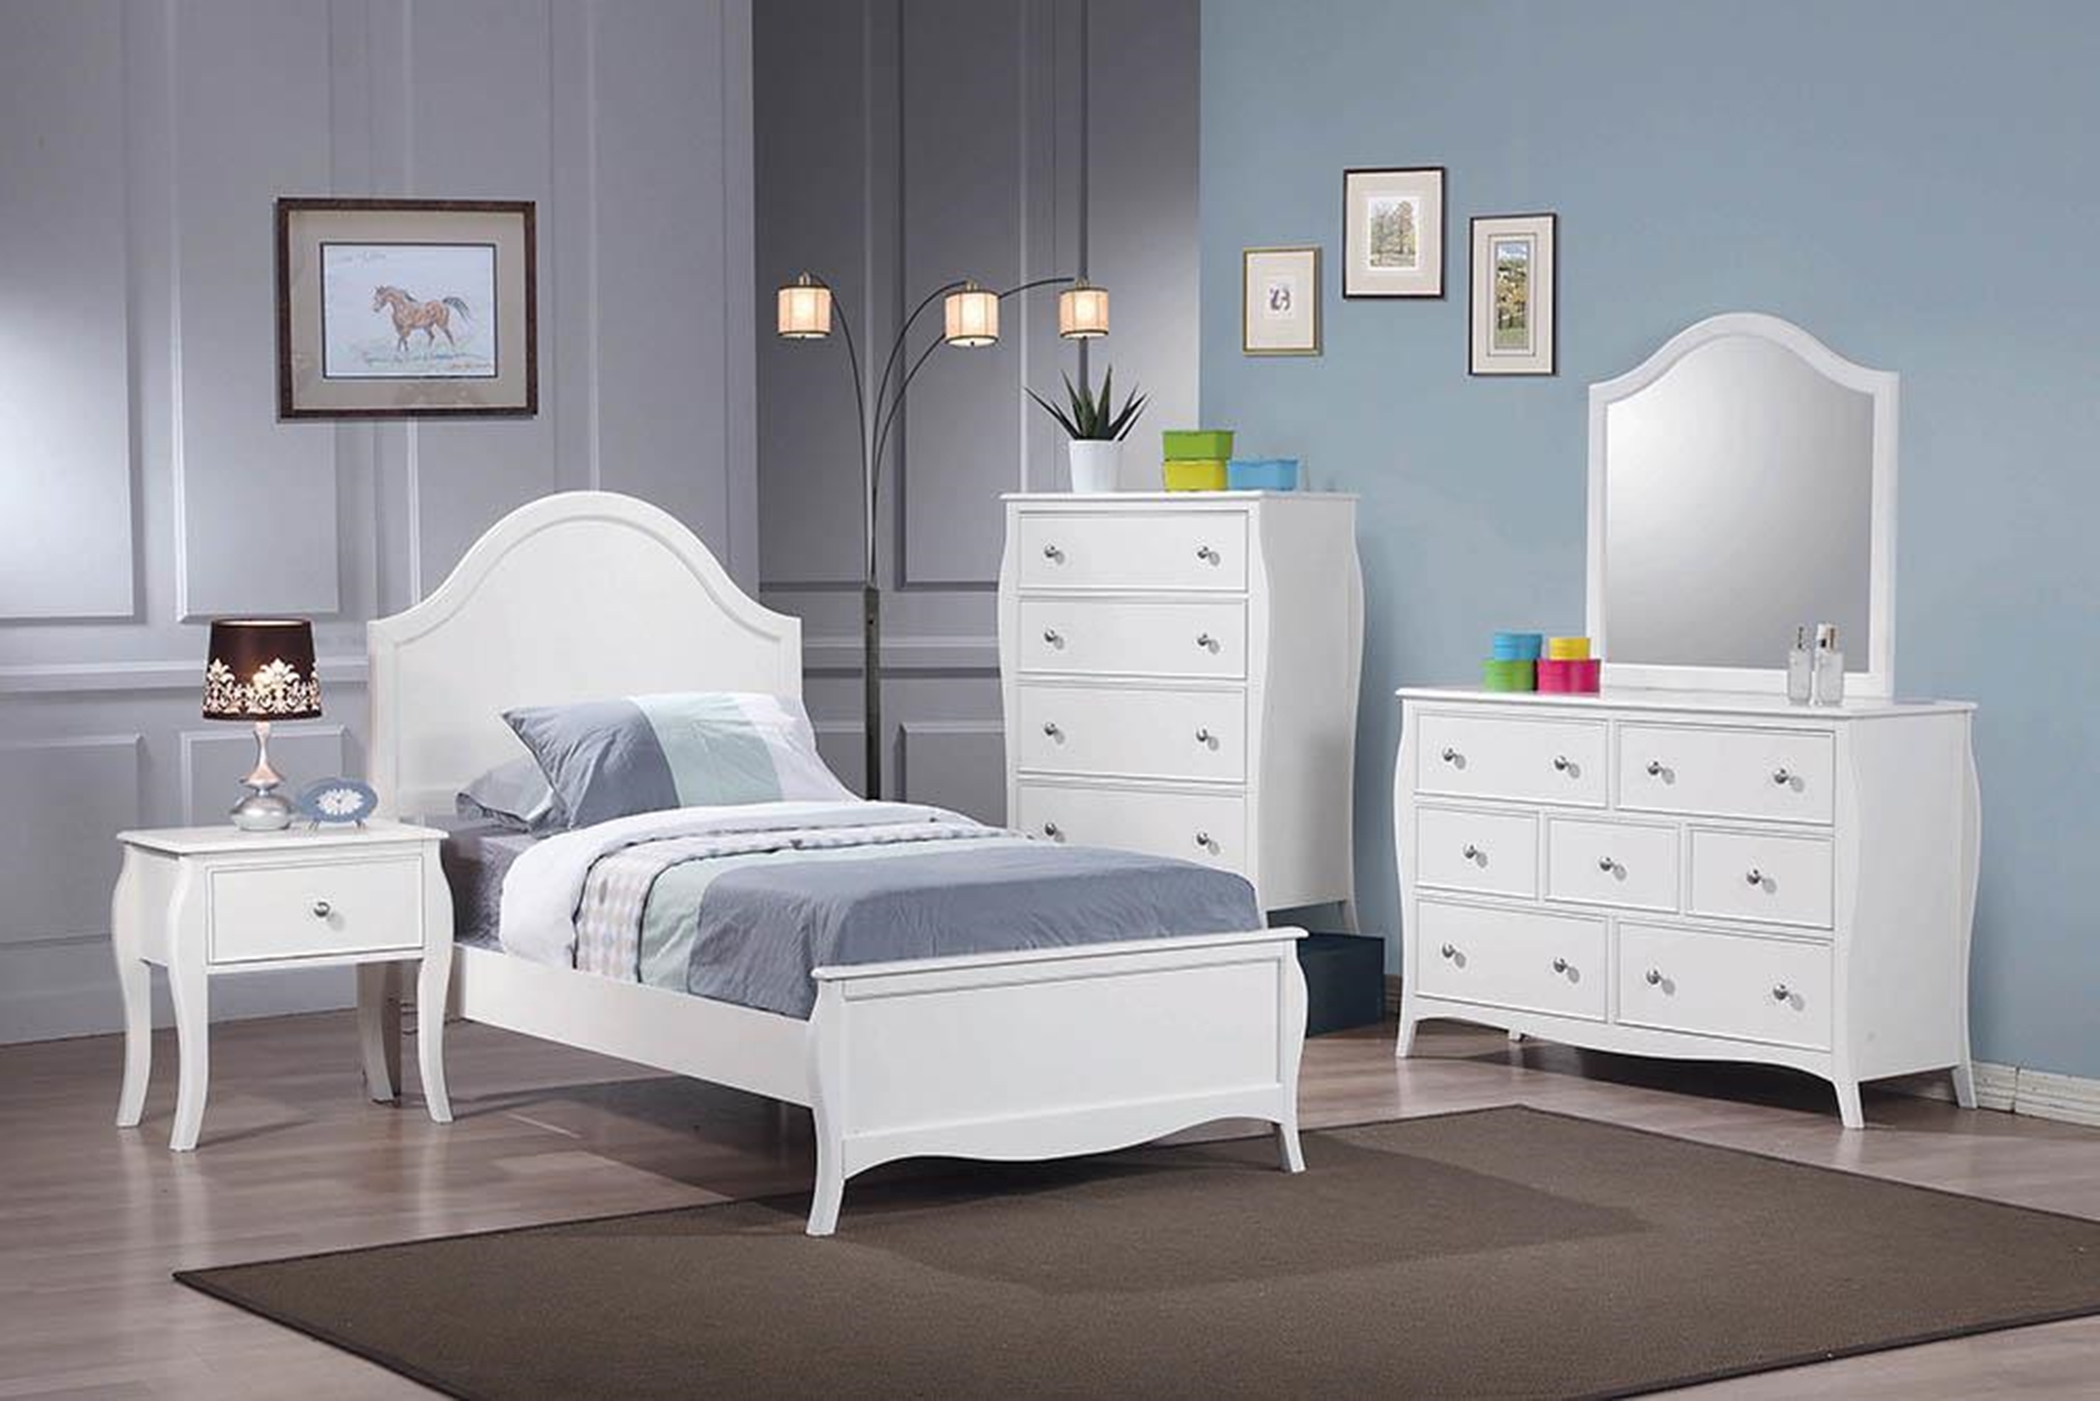 Dominique French Country Twin Bed - Click Image to Close